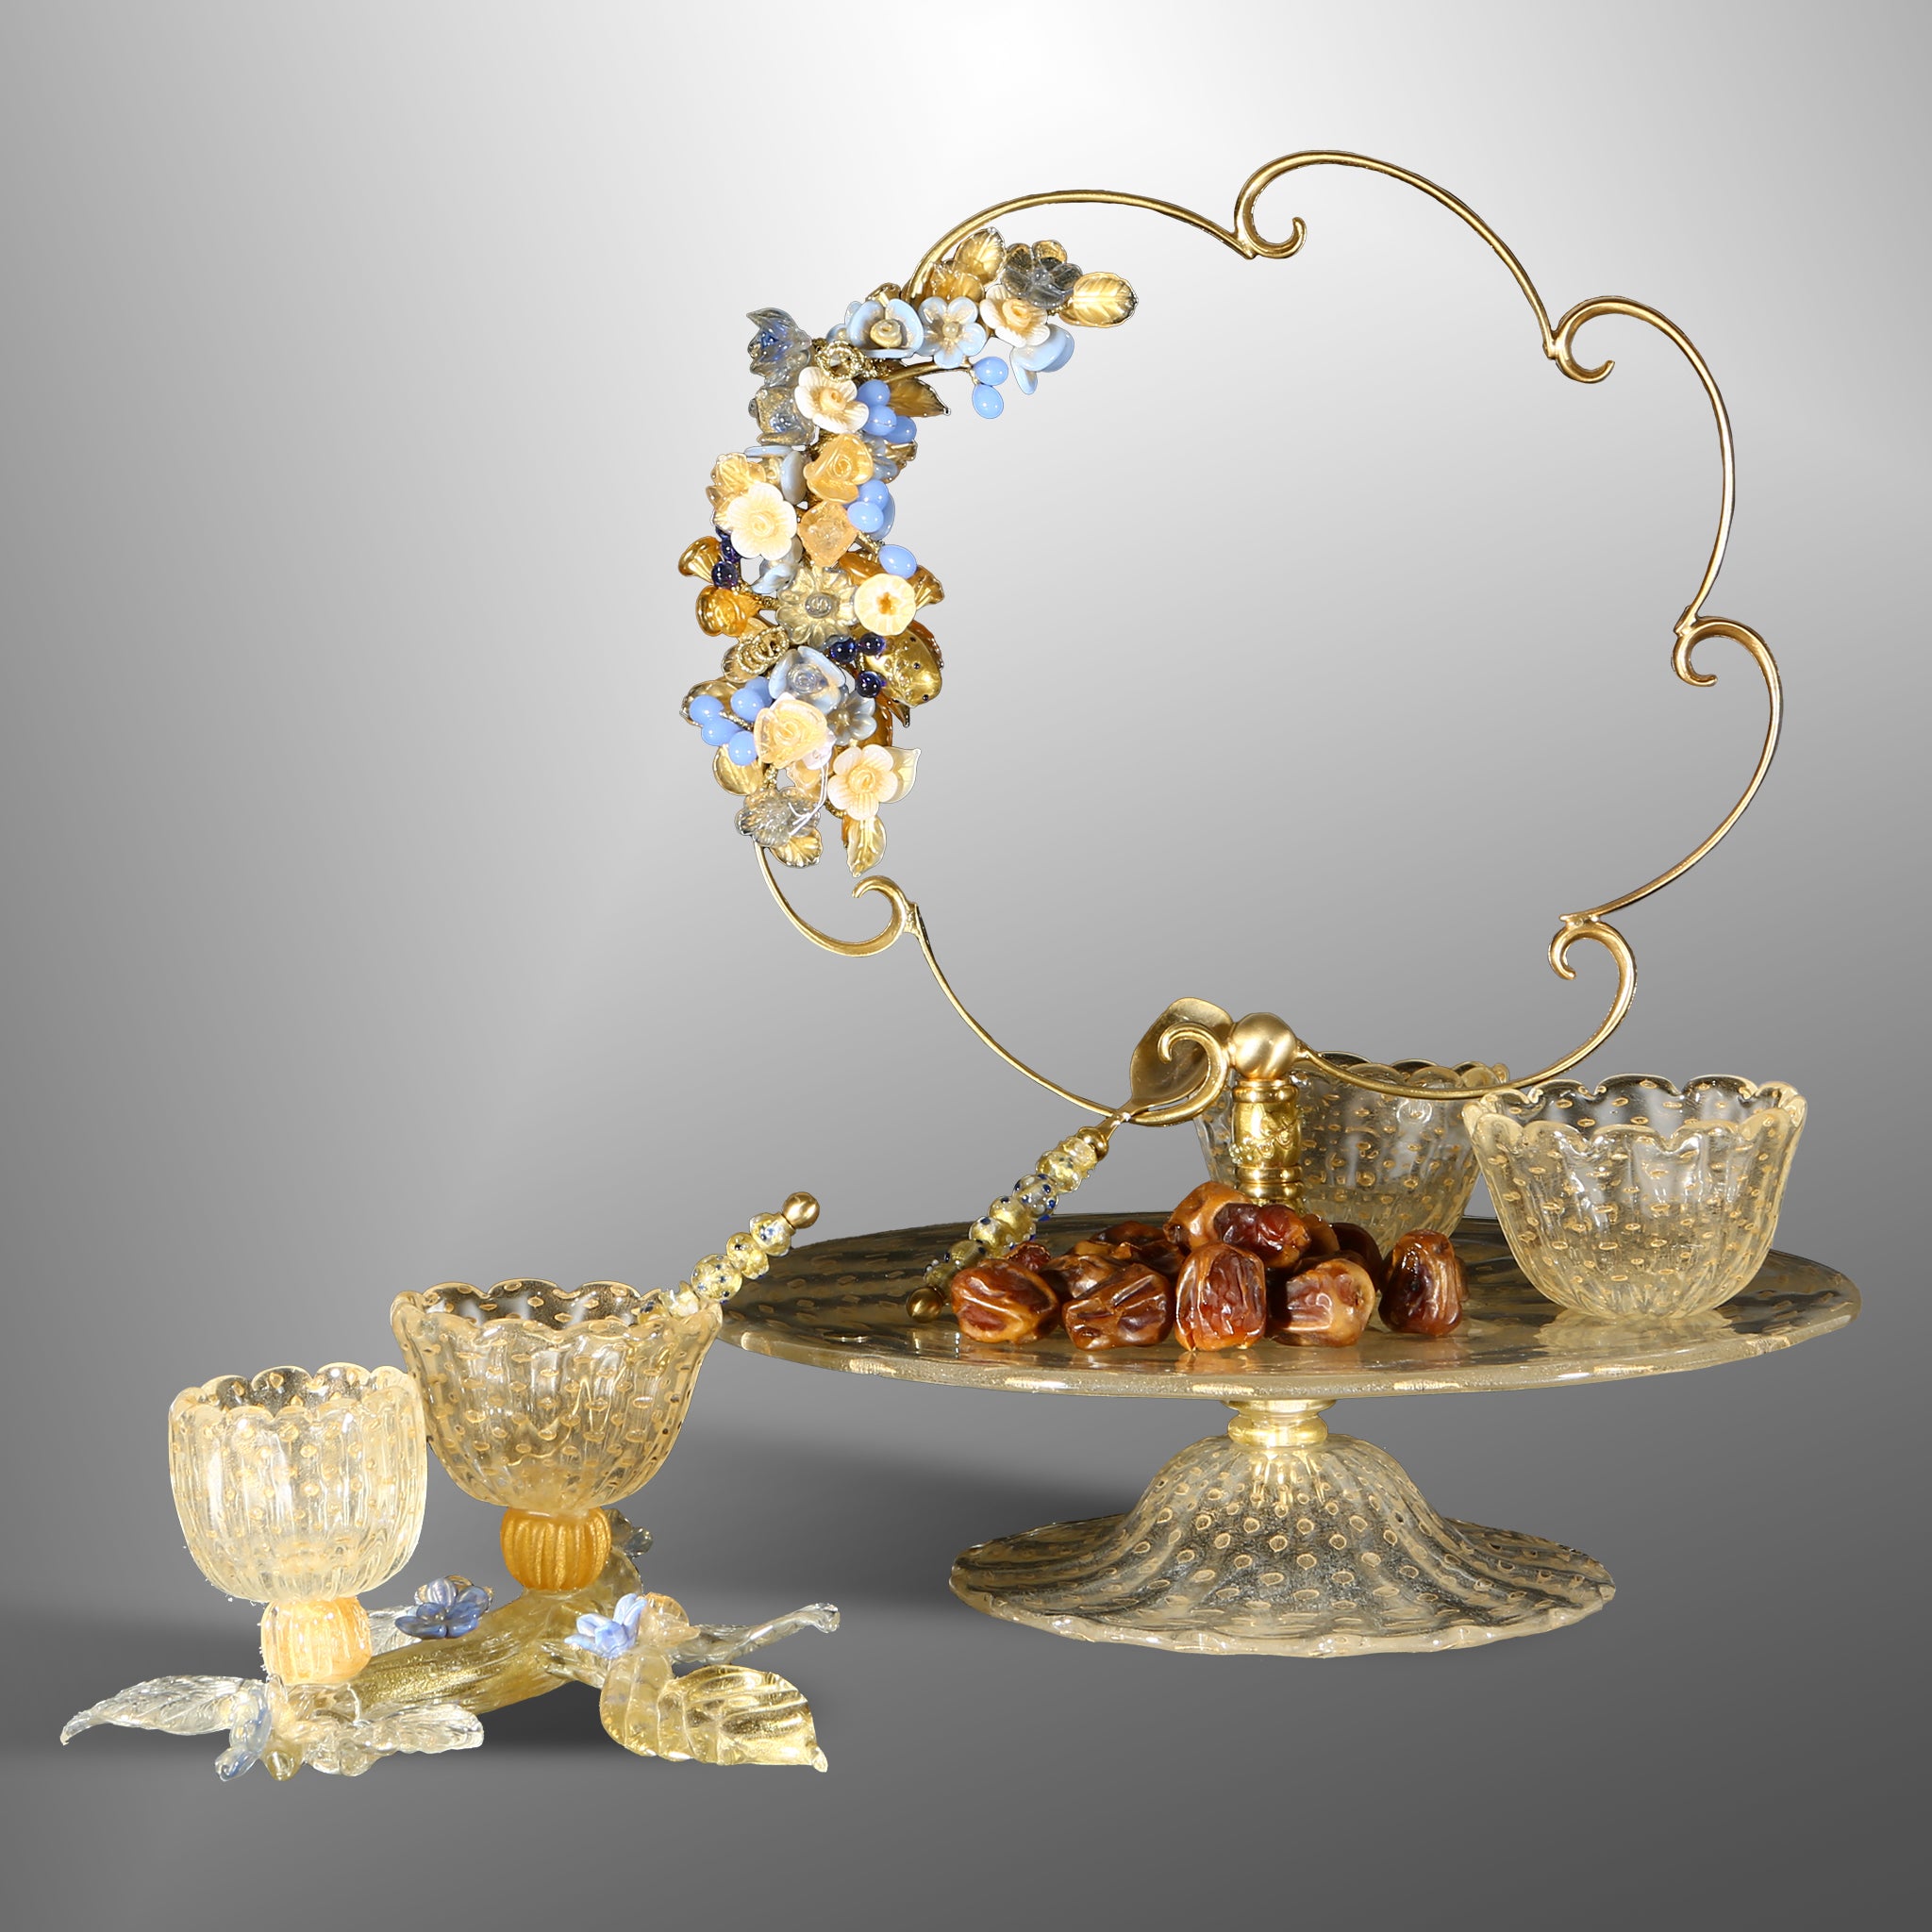 Tray with backsplash, twig with bowls, cups and teaspoons